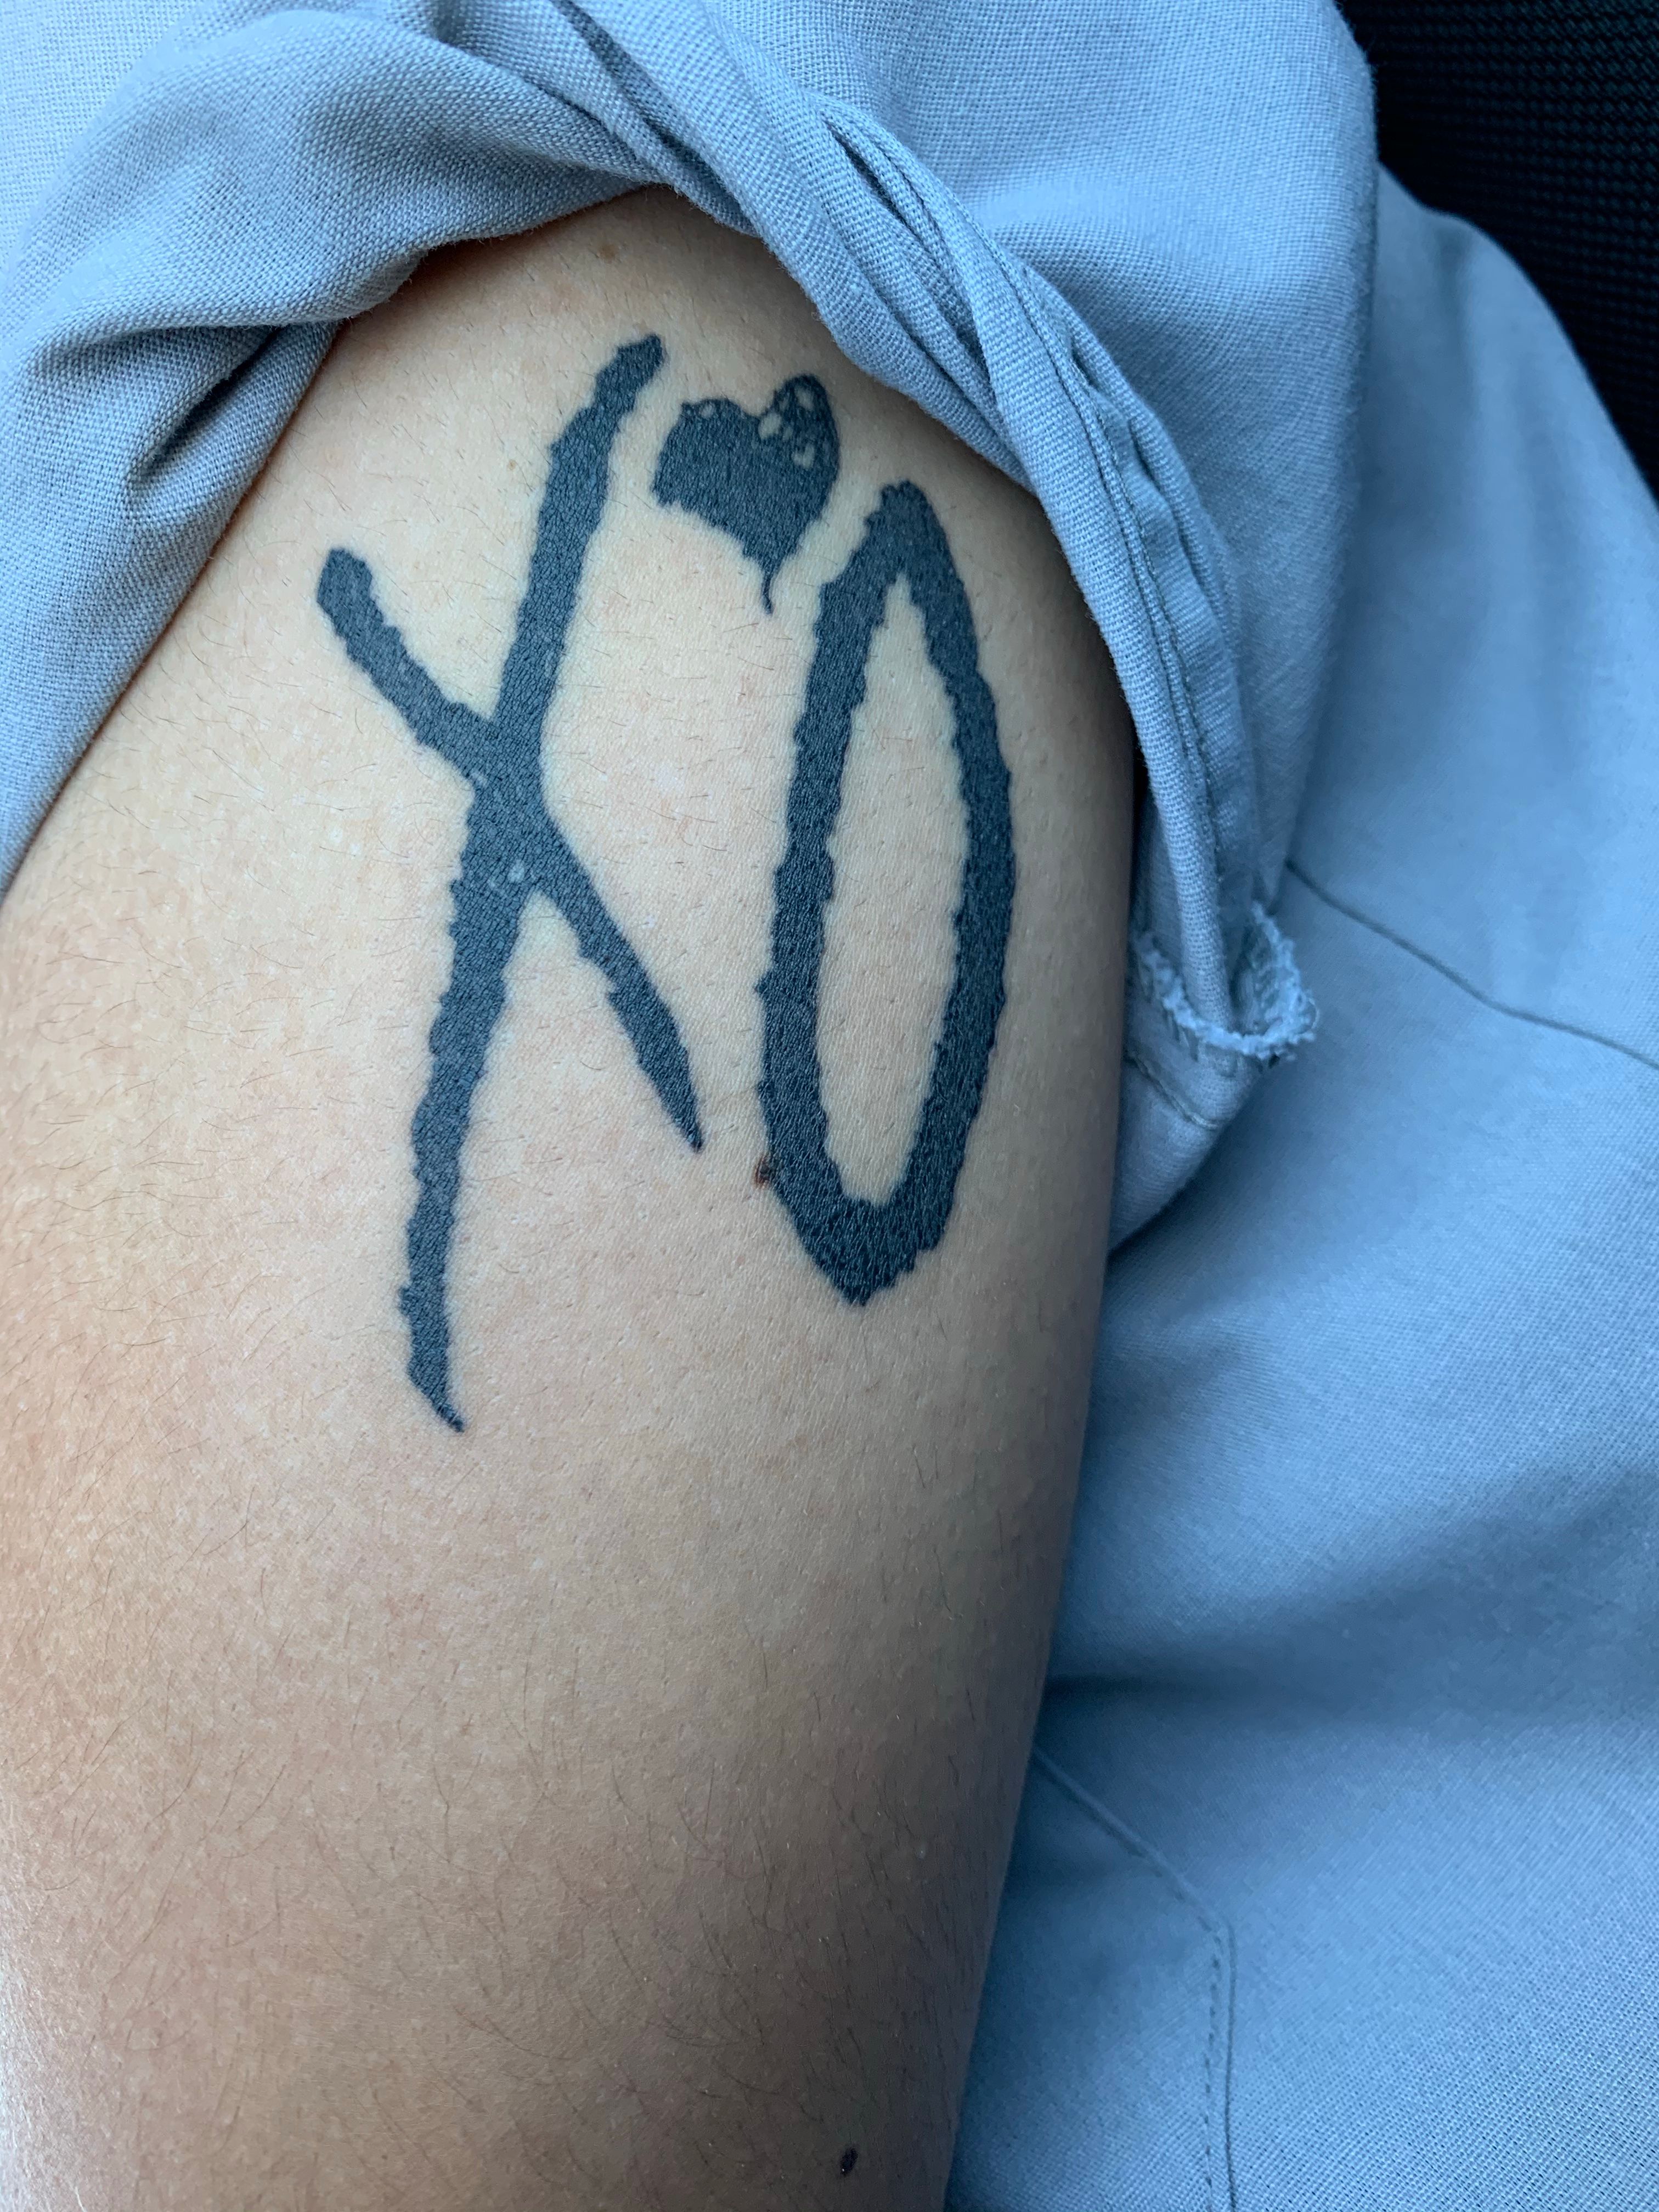 HELP! Getting a Tattoo & I want to clarify the Album Symbols for After  Hours (moon or dice?!) and Dawn FM?! : r/TheWeeknd